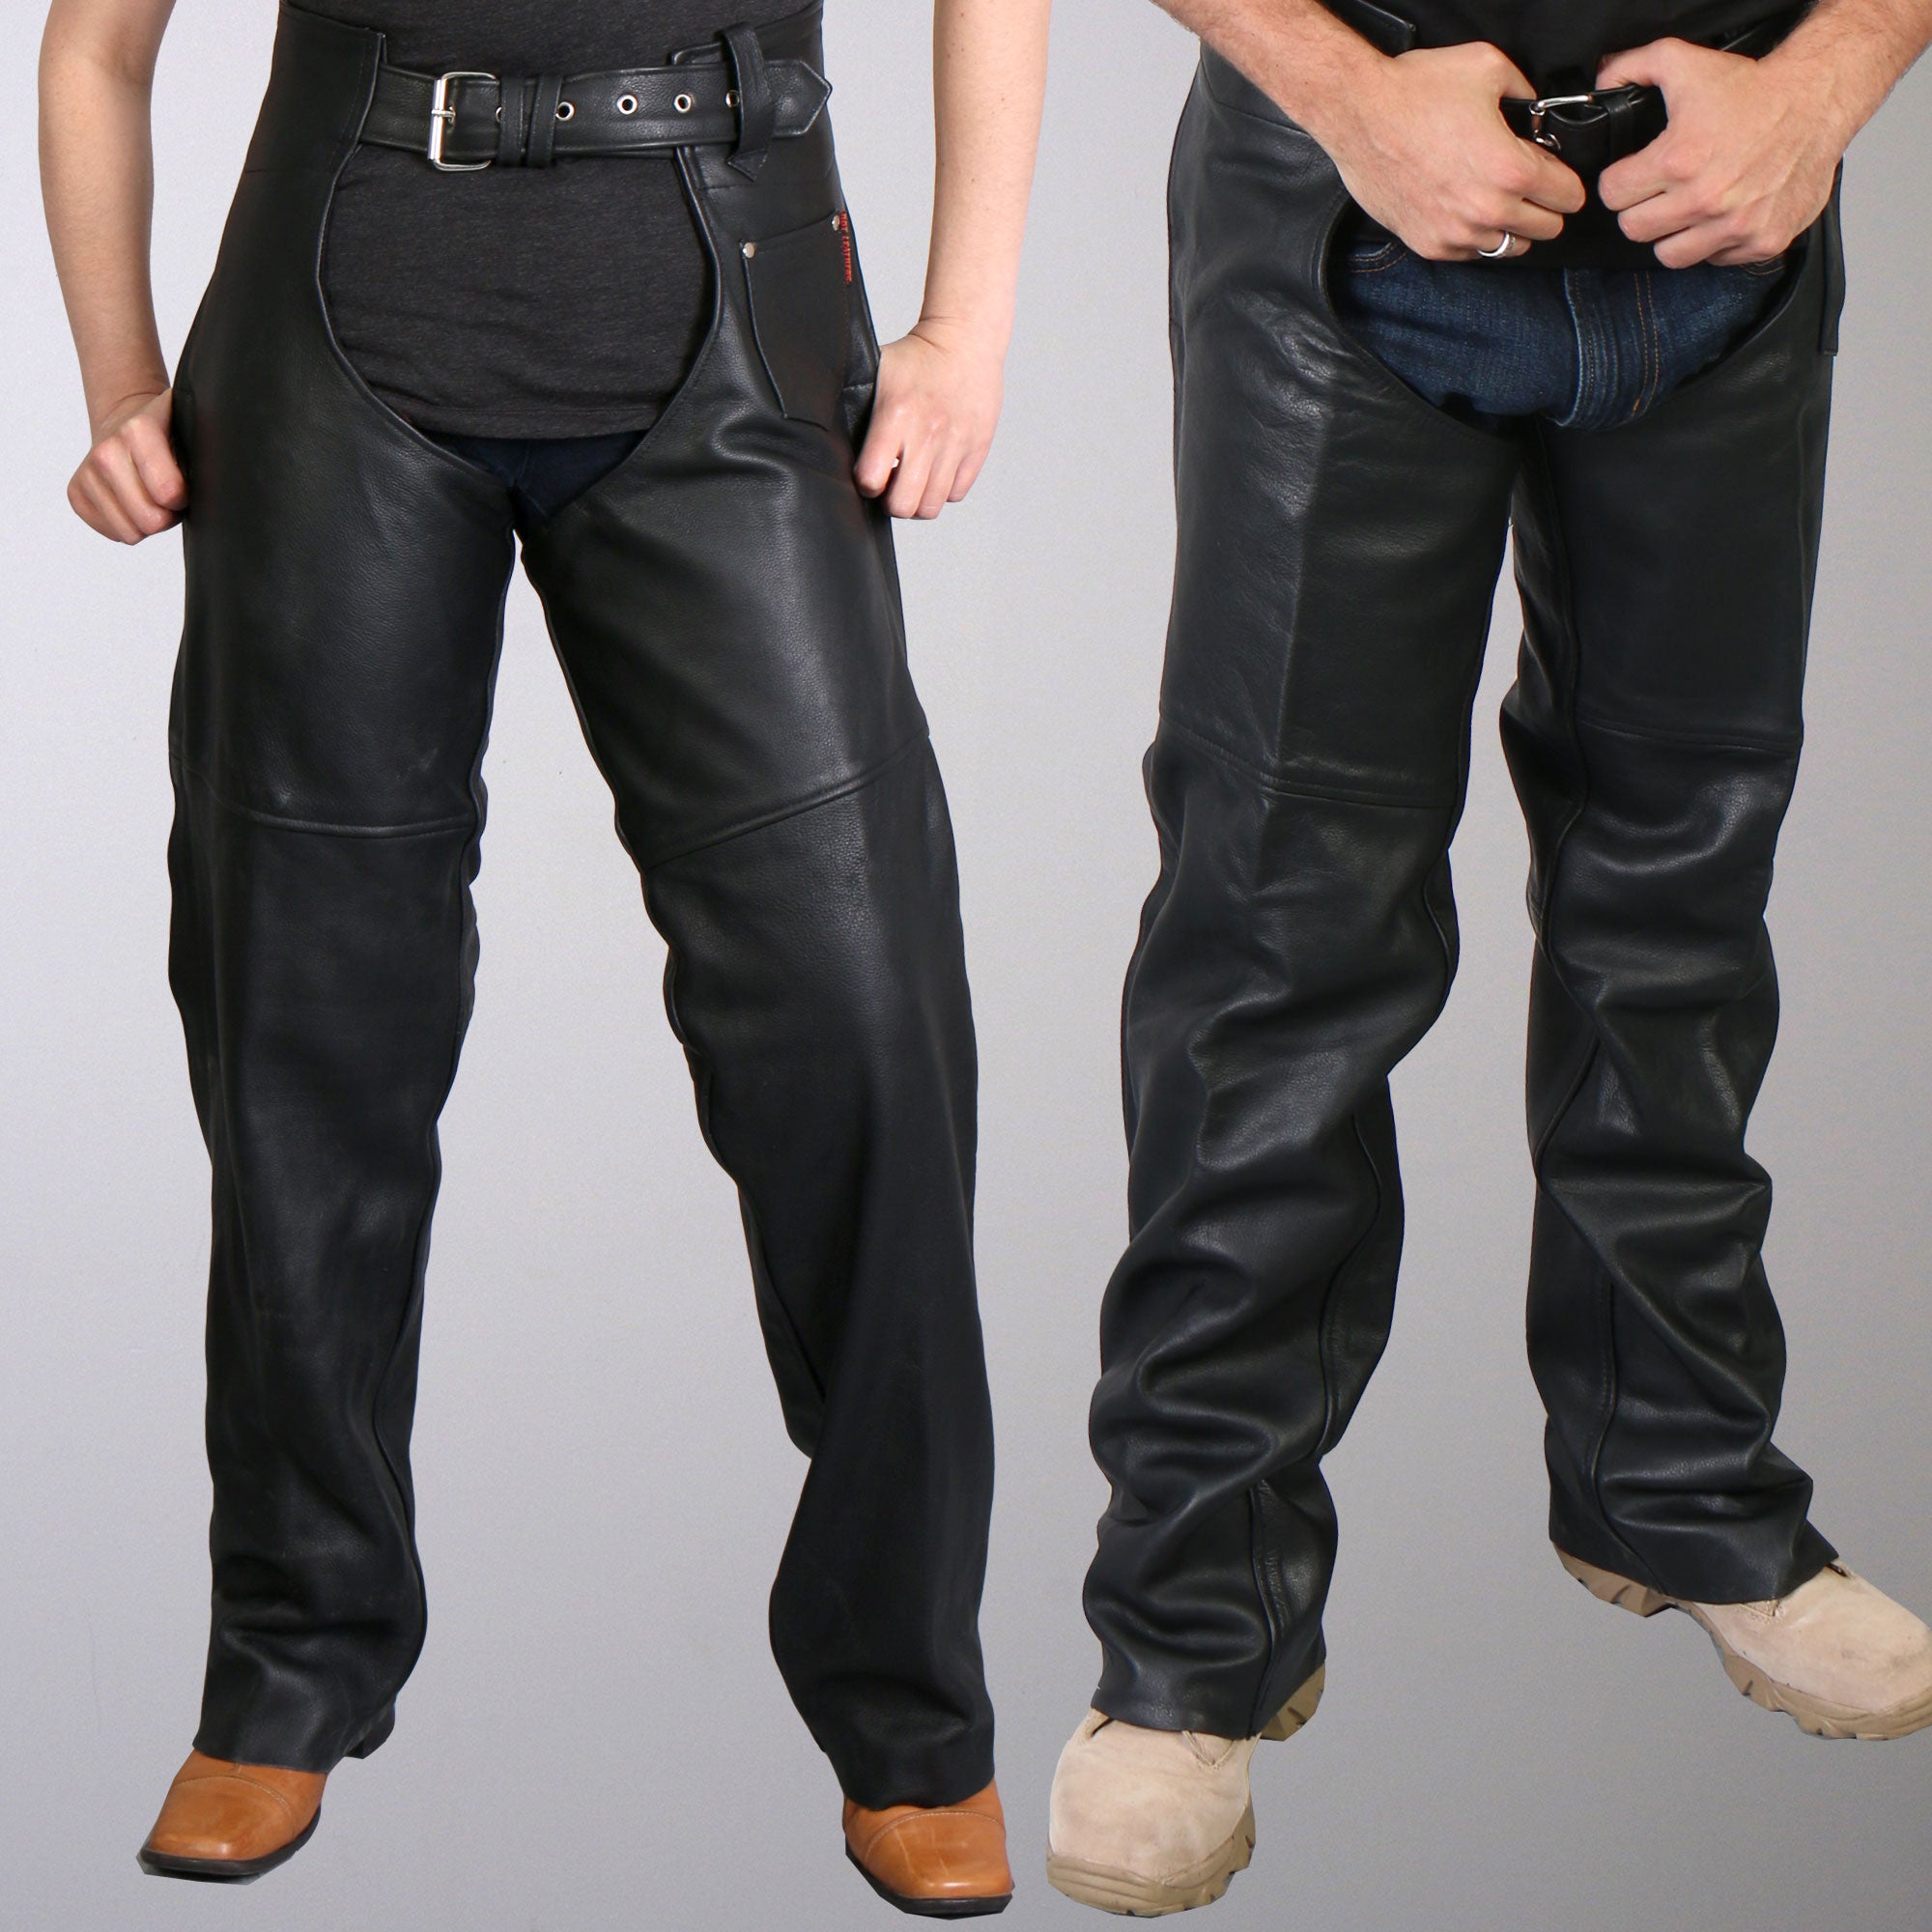 Hot Leathers CHM1005 Best Quality Fully Lined Motorcycle Unisex Black Leather Biker Chaps